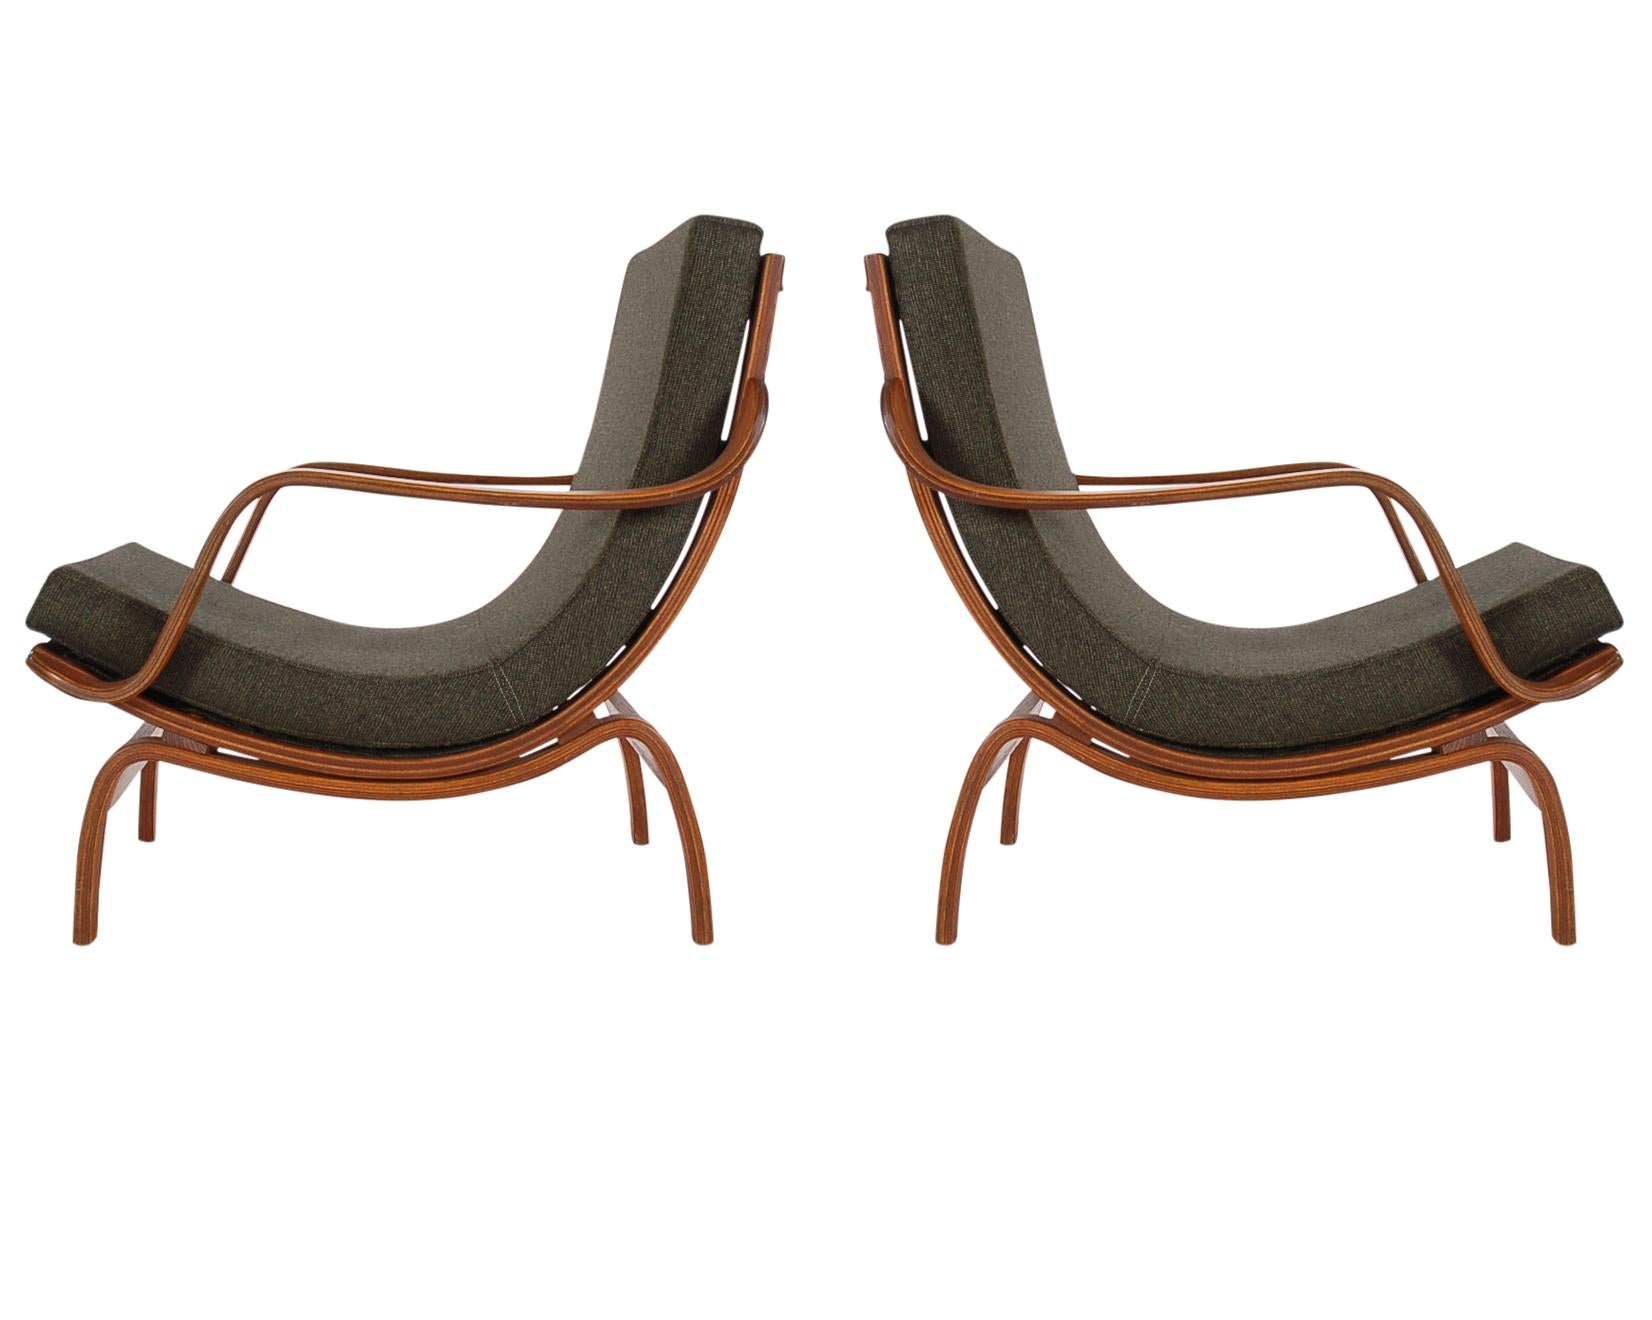 Pair of Midcentury Danish Modern Bentwood Lounge Chairs in Walnut Stained Oak 1